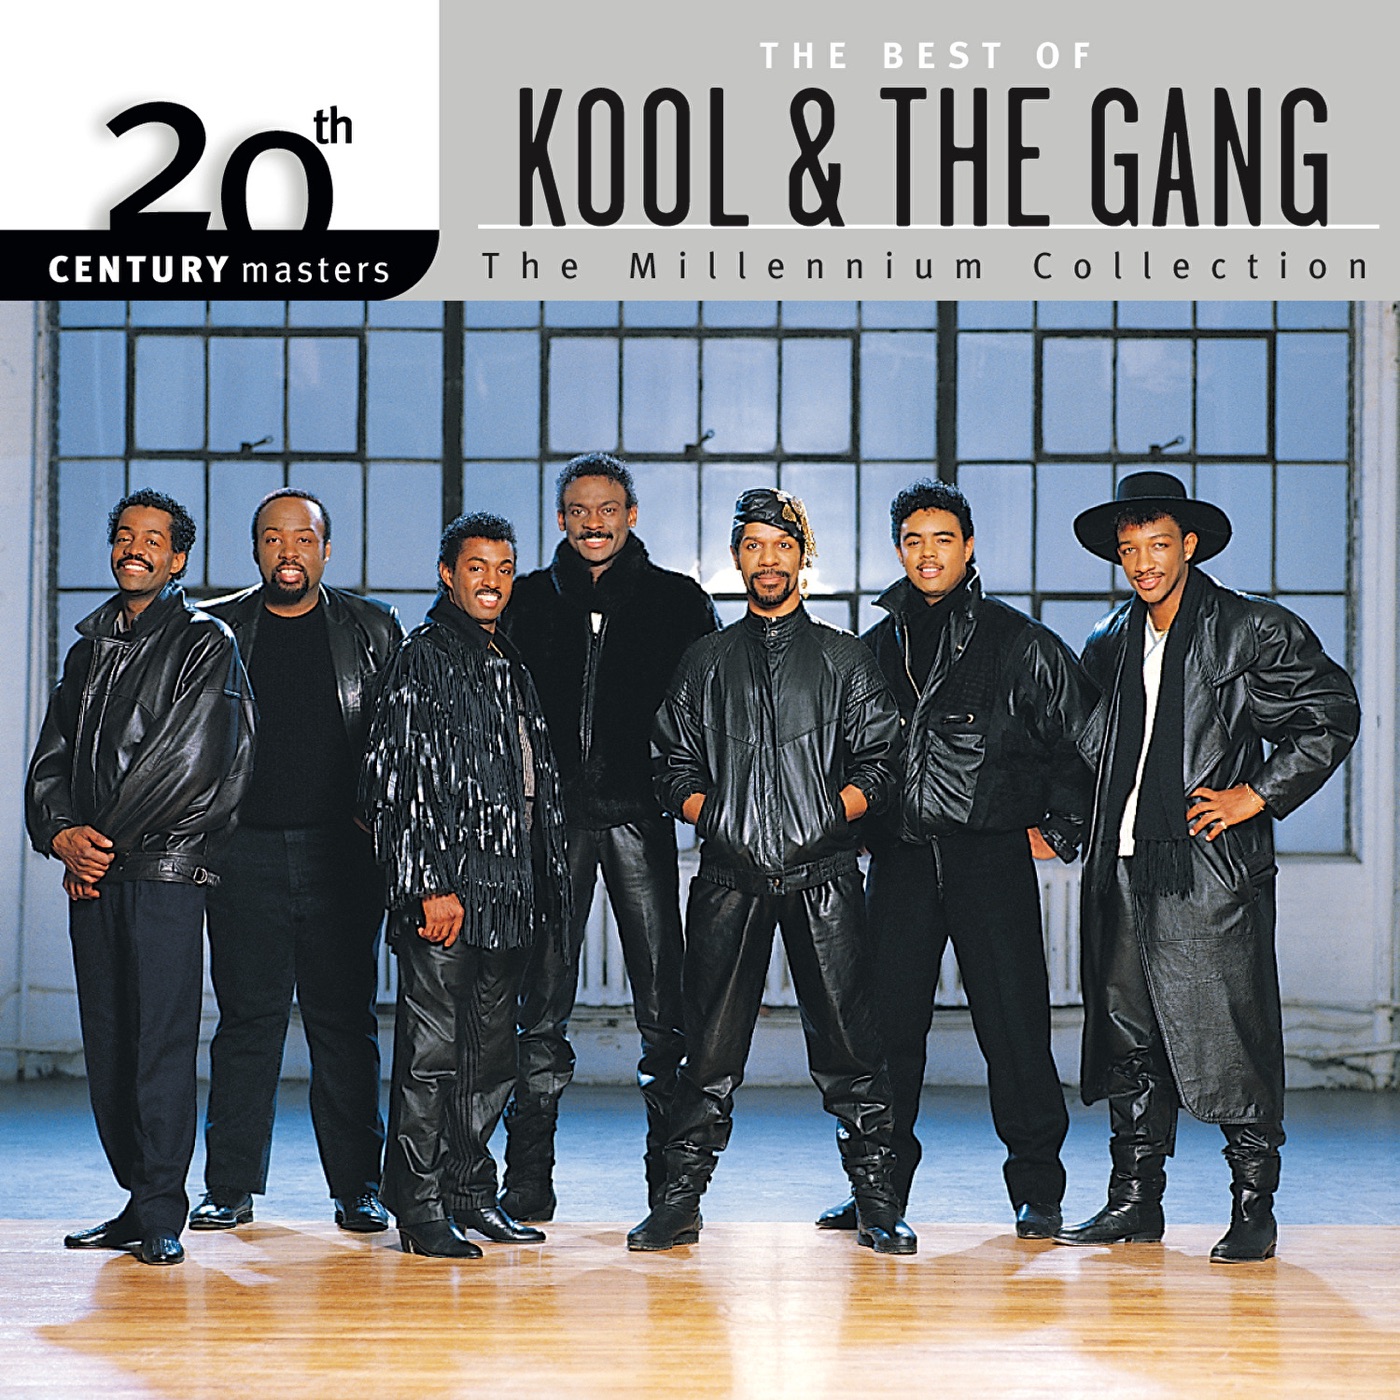 20th Century Masters: The Millennium Collection: The Best Of Kool & The Gang by Kool & The Gang